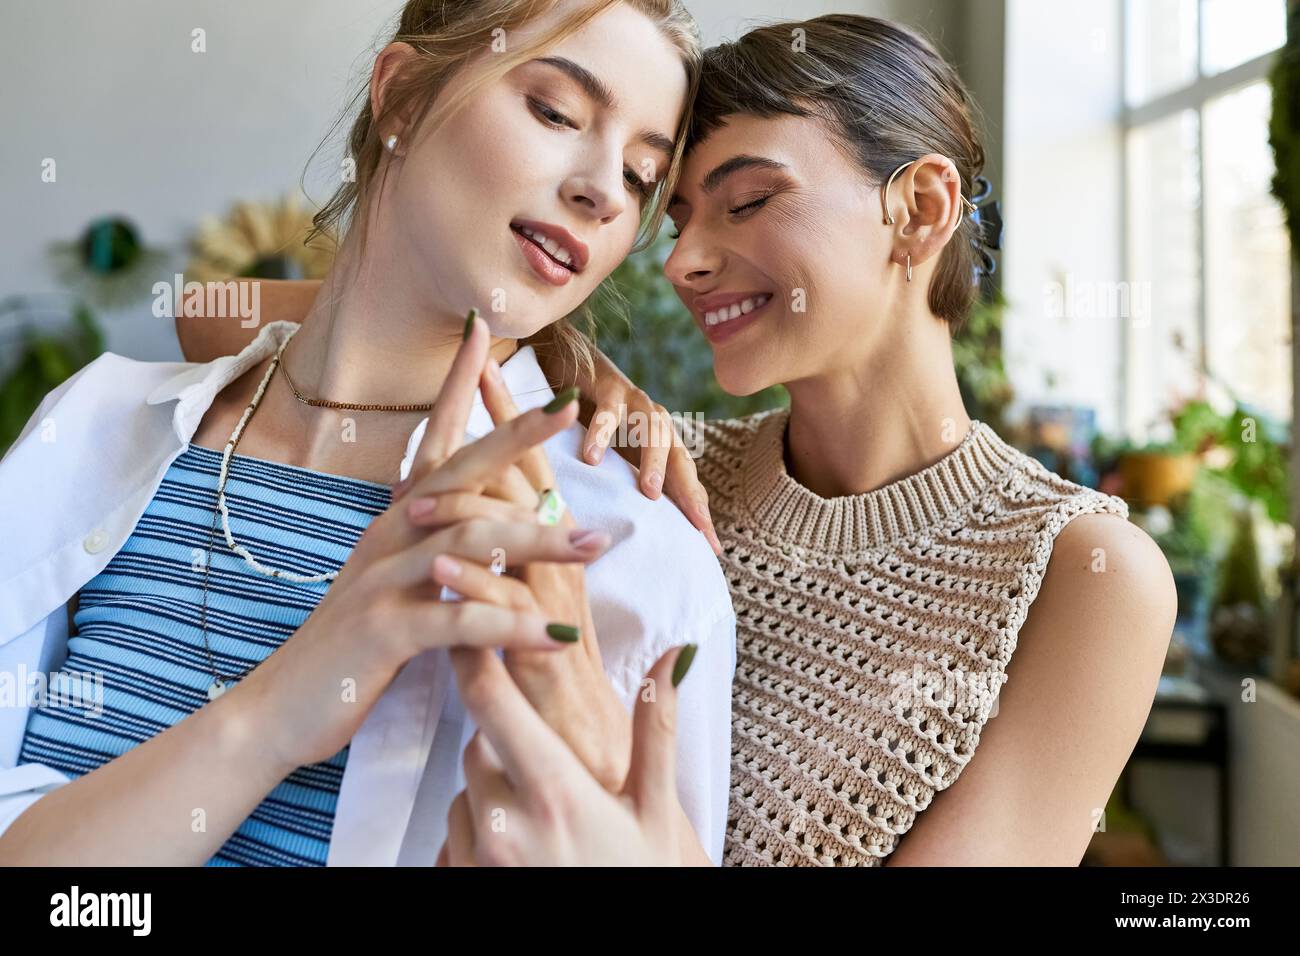 A loving lesbian couple, both women, stand together at an art studio, deep in thought. Stock Photo